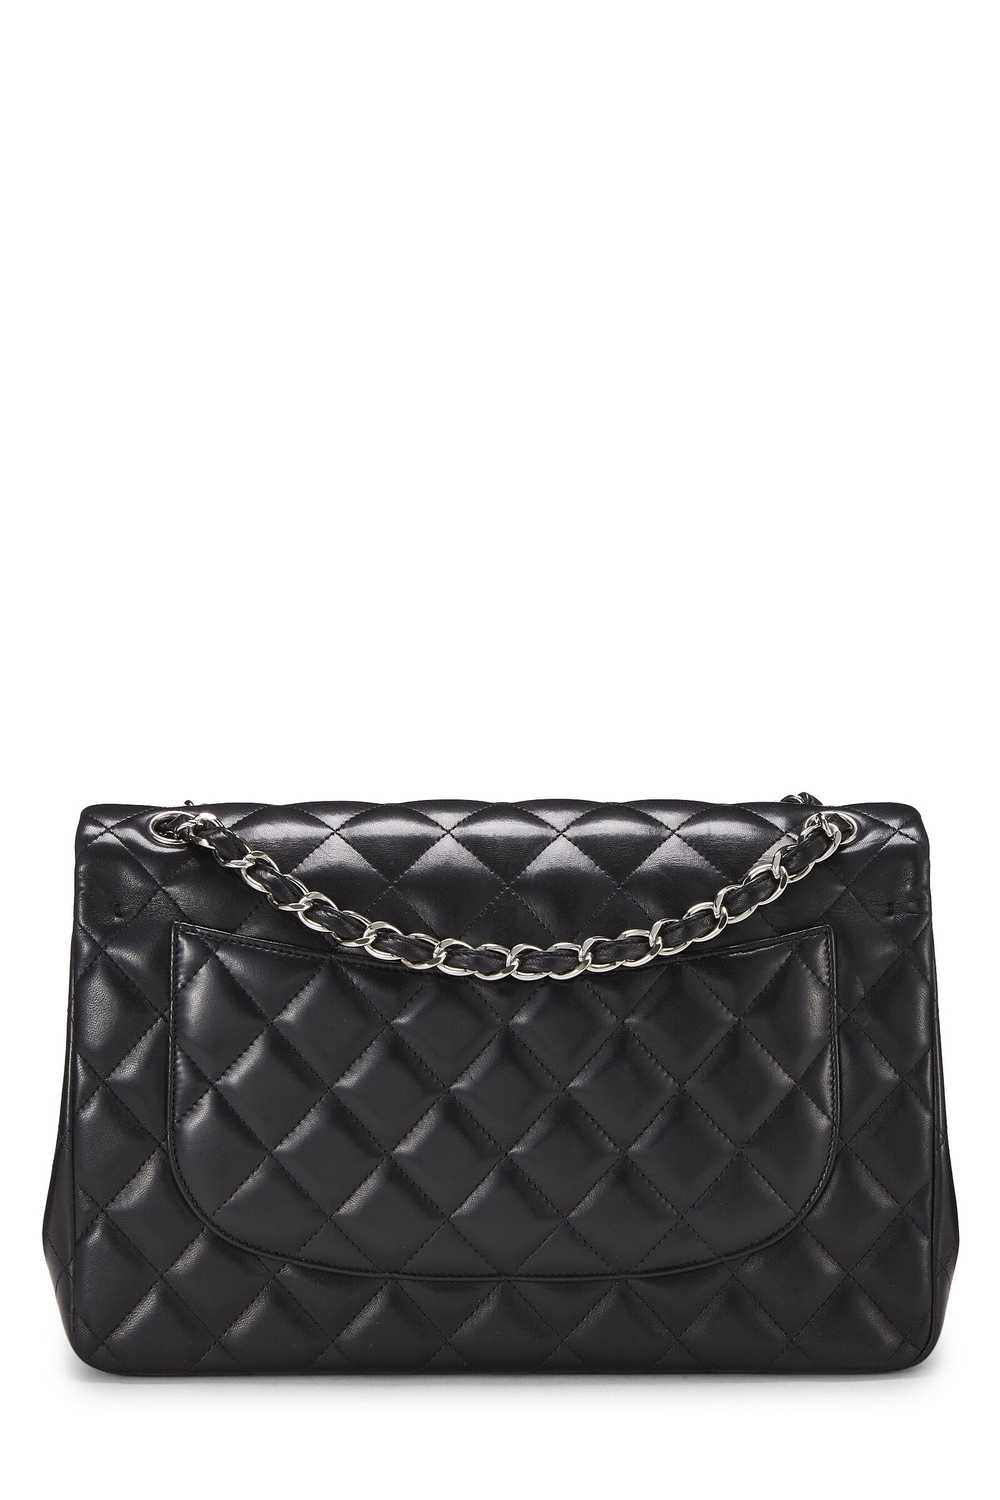 Black Quilted Lambskin New Classic Double Flap Ju… - image 4